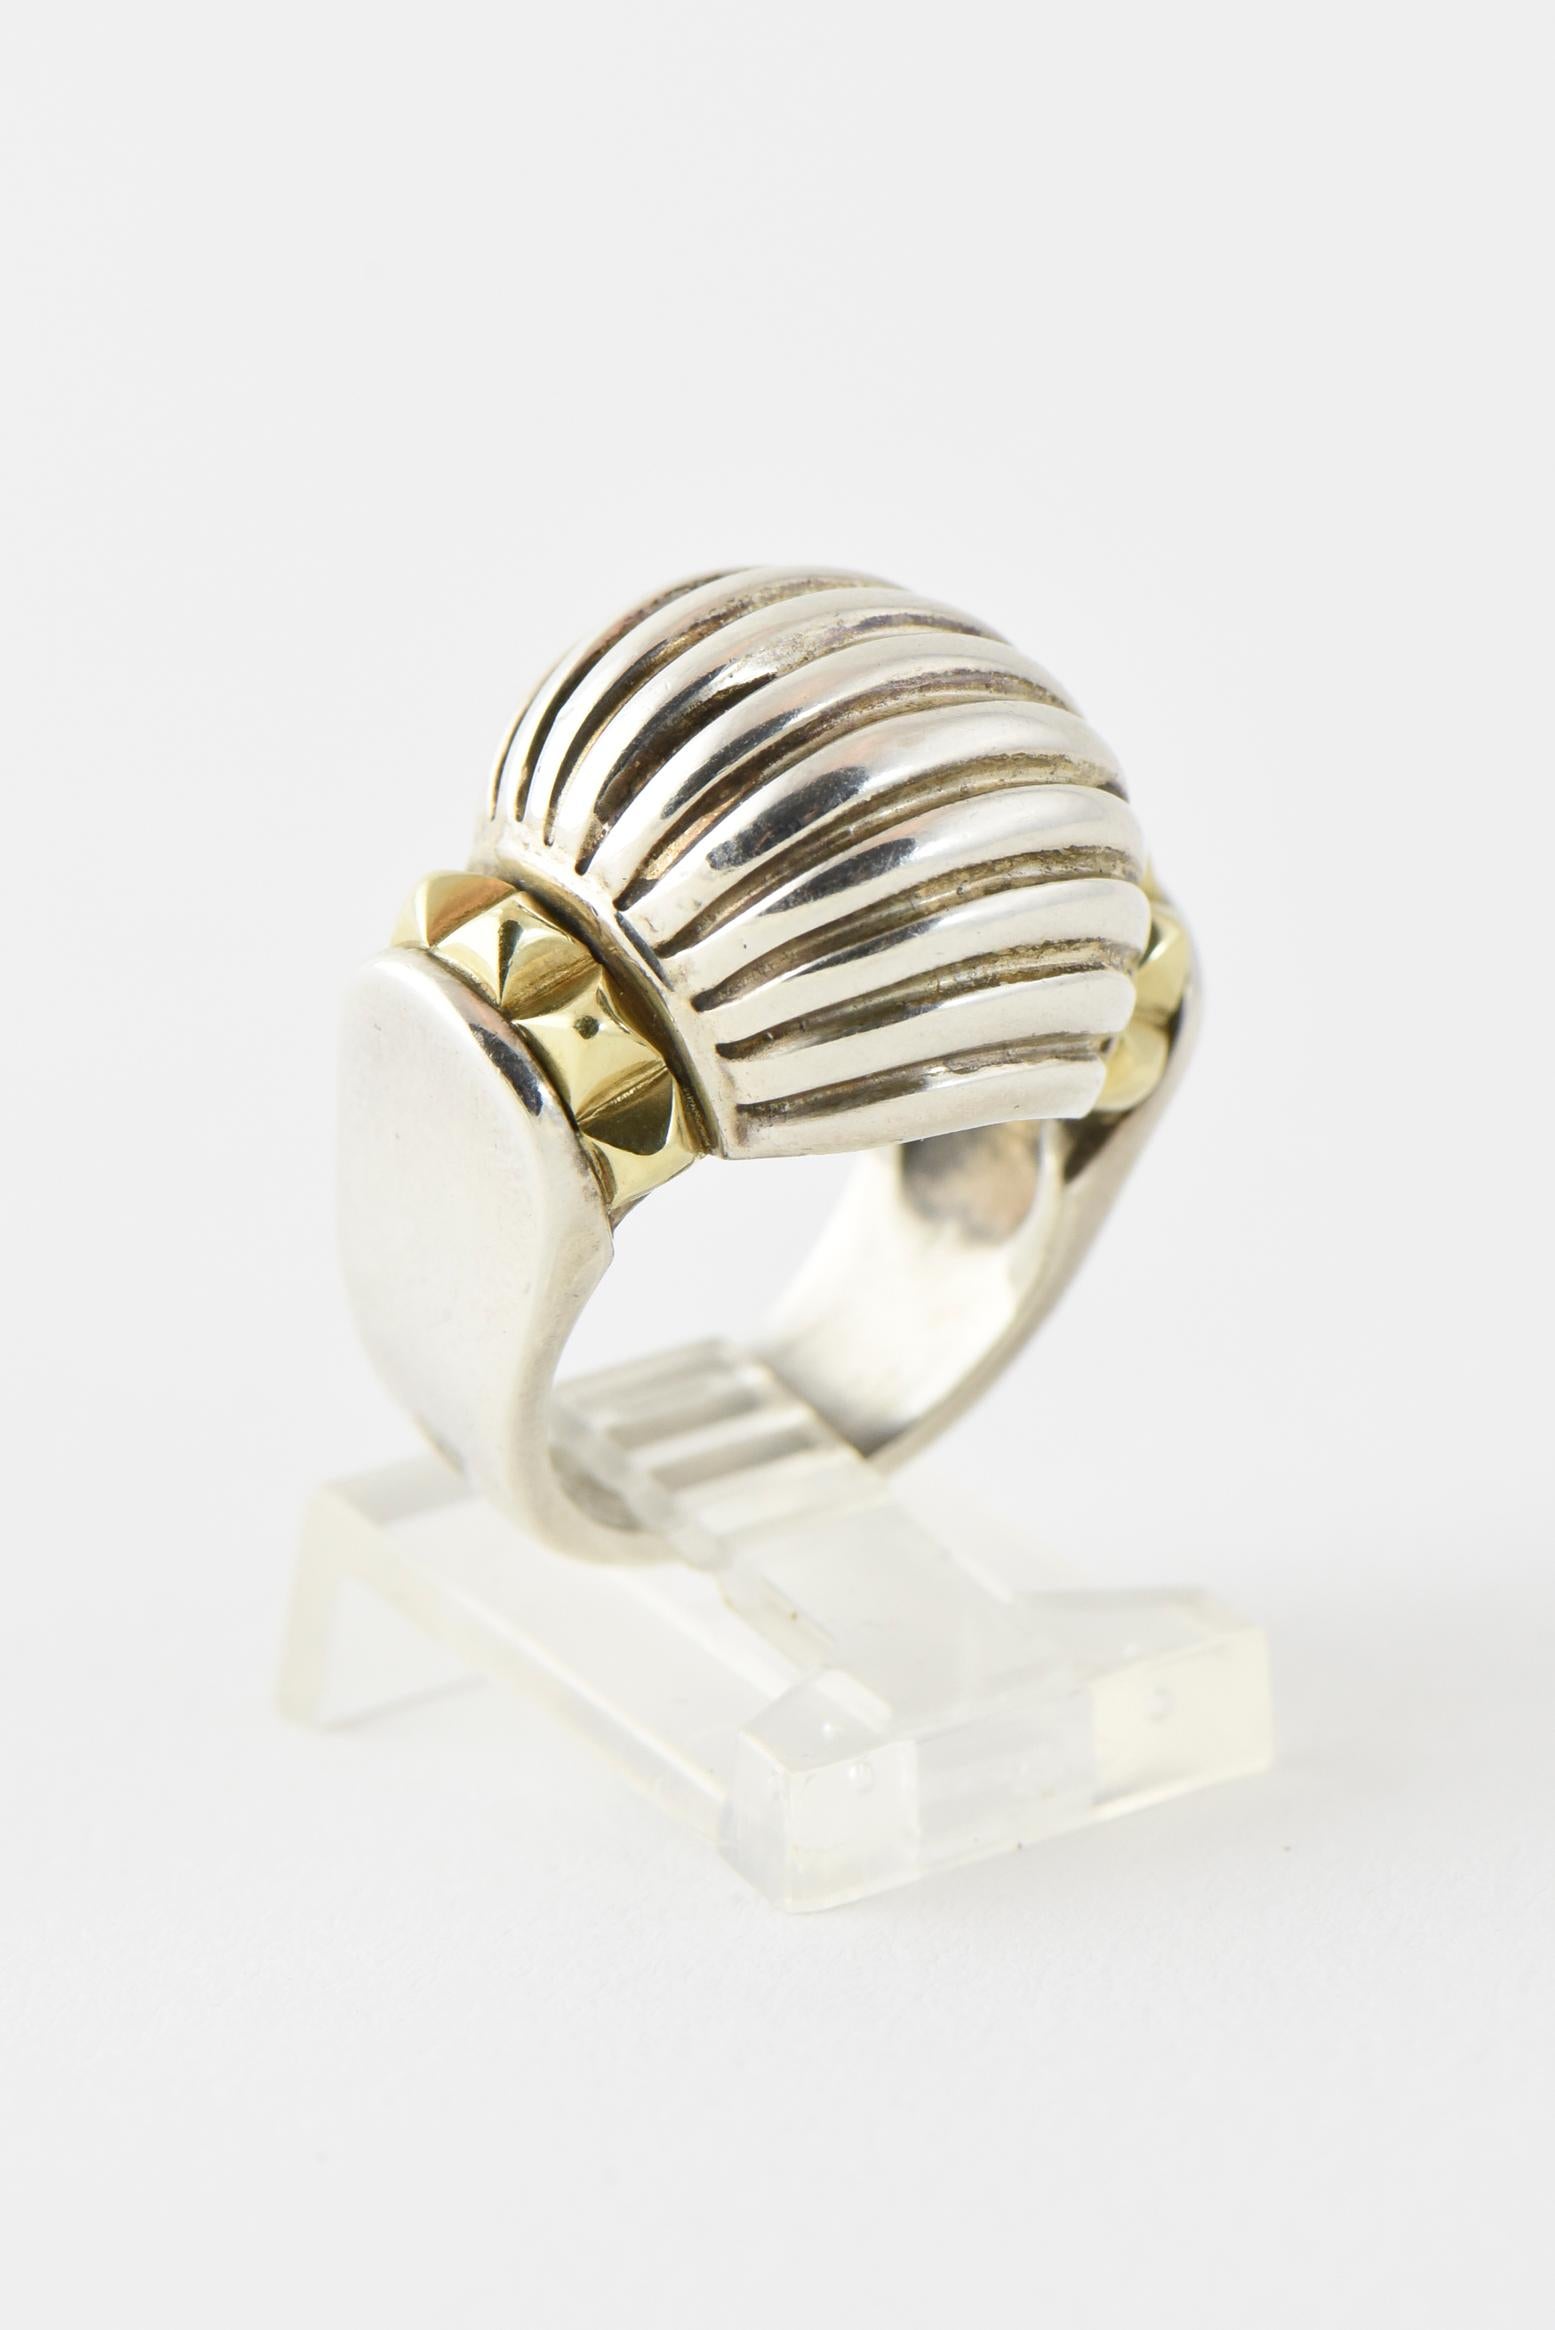 Caviar sterling silver ribbed dome ring with 18K gold pyramid accents on the sides. Marked: Caviar 750 925. U.S. size: 5; can be sized. Minor scratches, dings.